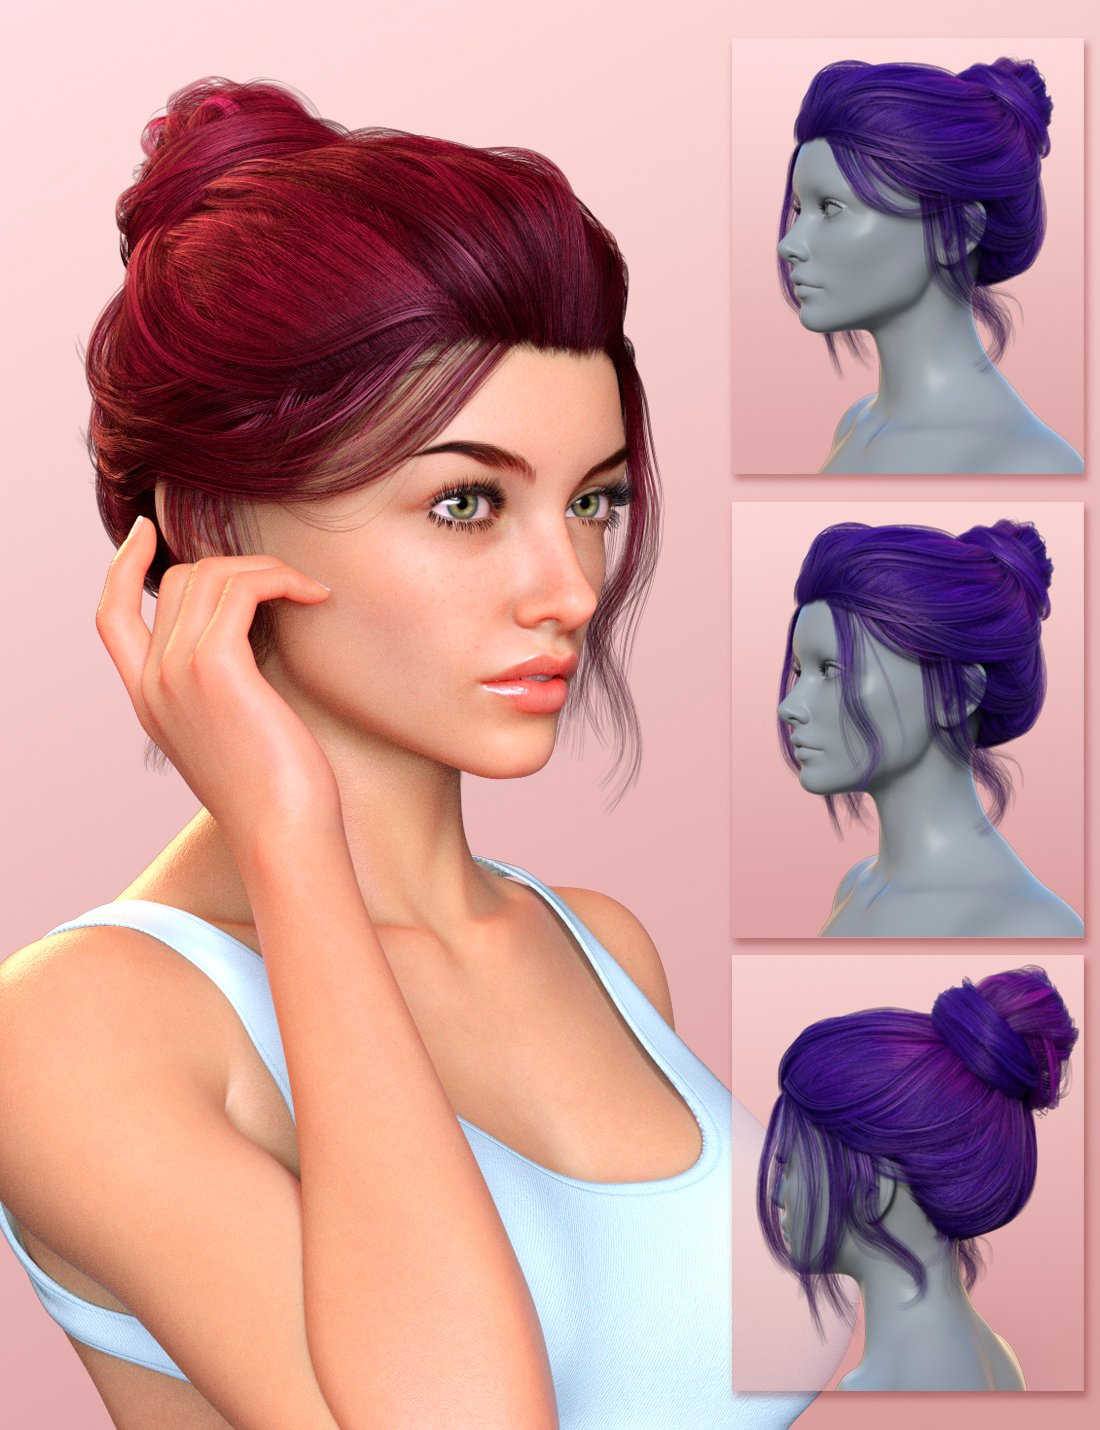 Magical Arts Updo Hairstyle for Genesis 8.1 Females by: Blue Rabbit, 3D Models by Daz 3D